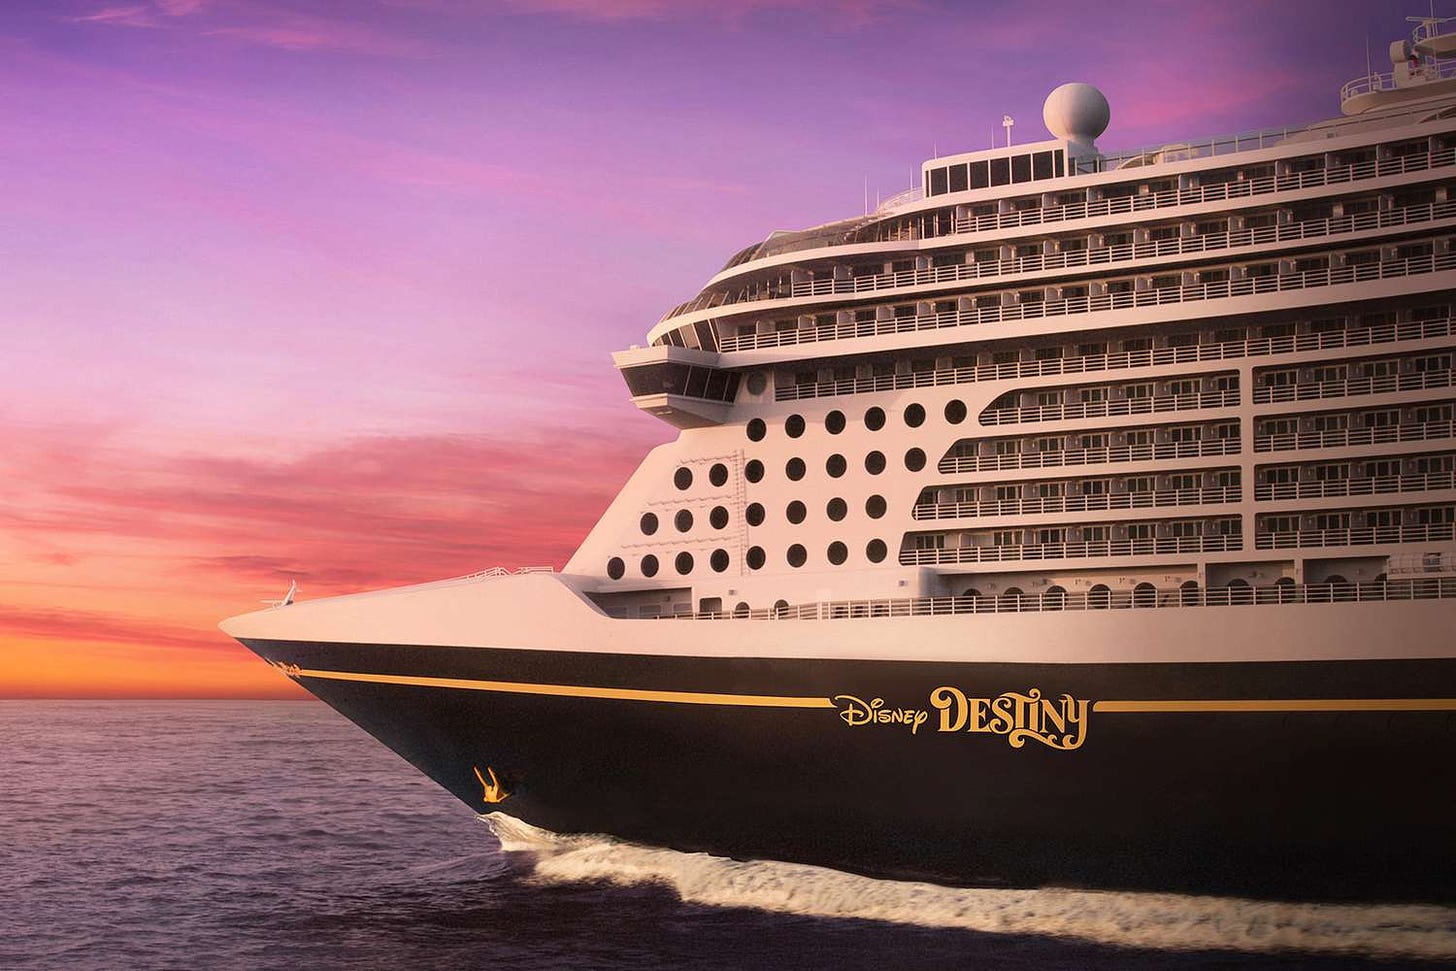 Disney Cruise Line Offers First Look at Its New 'Disney Destiny' Ship